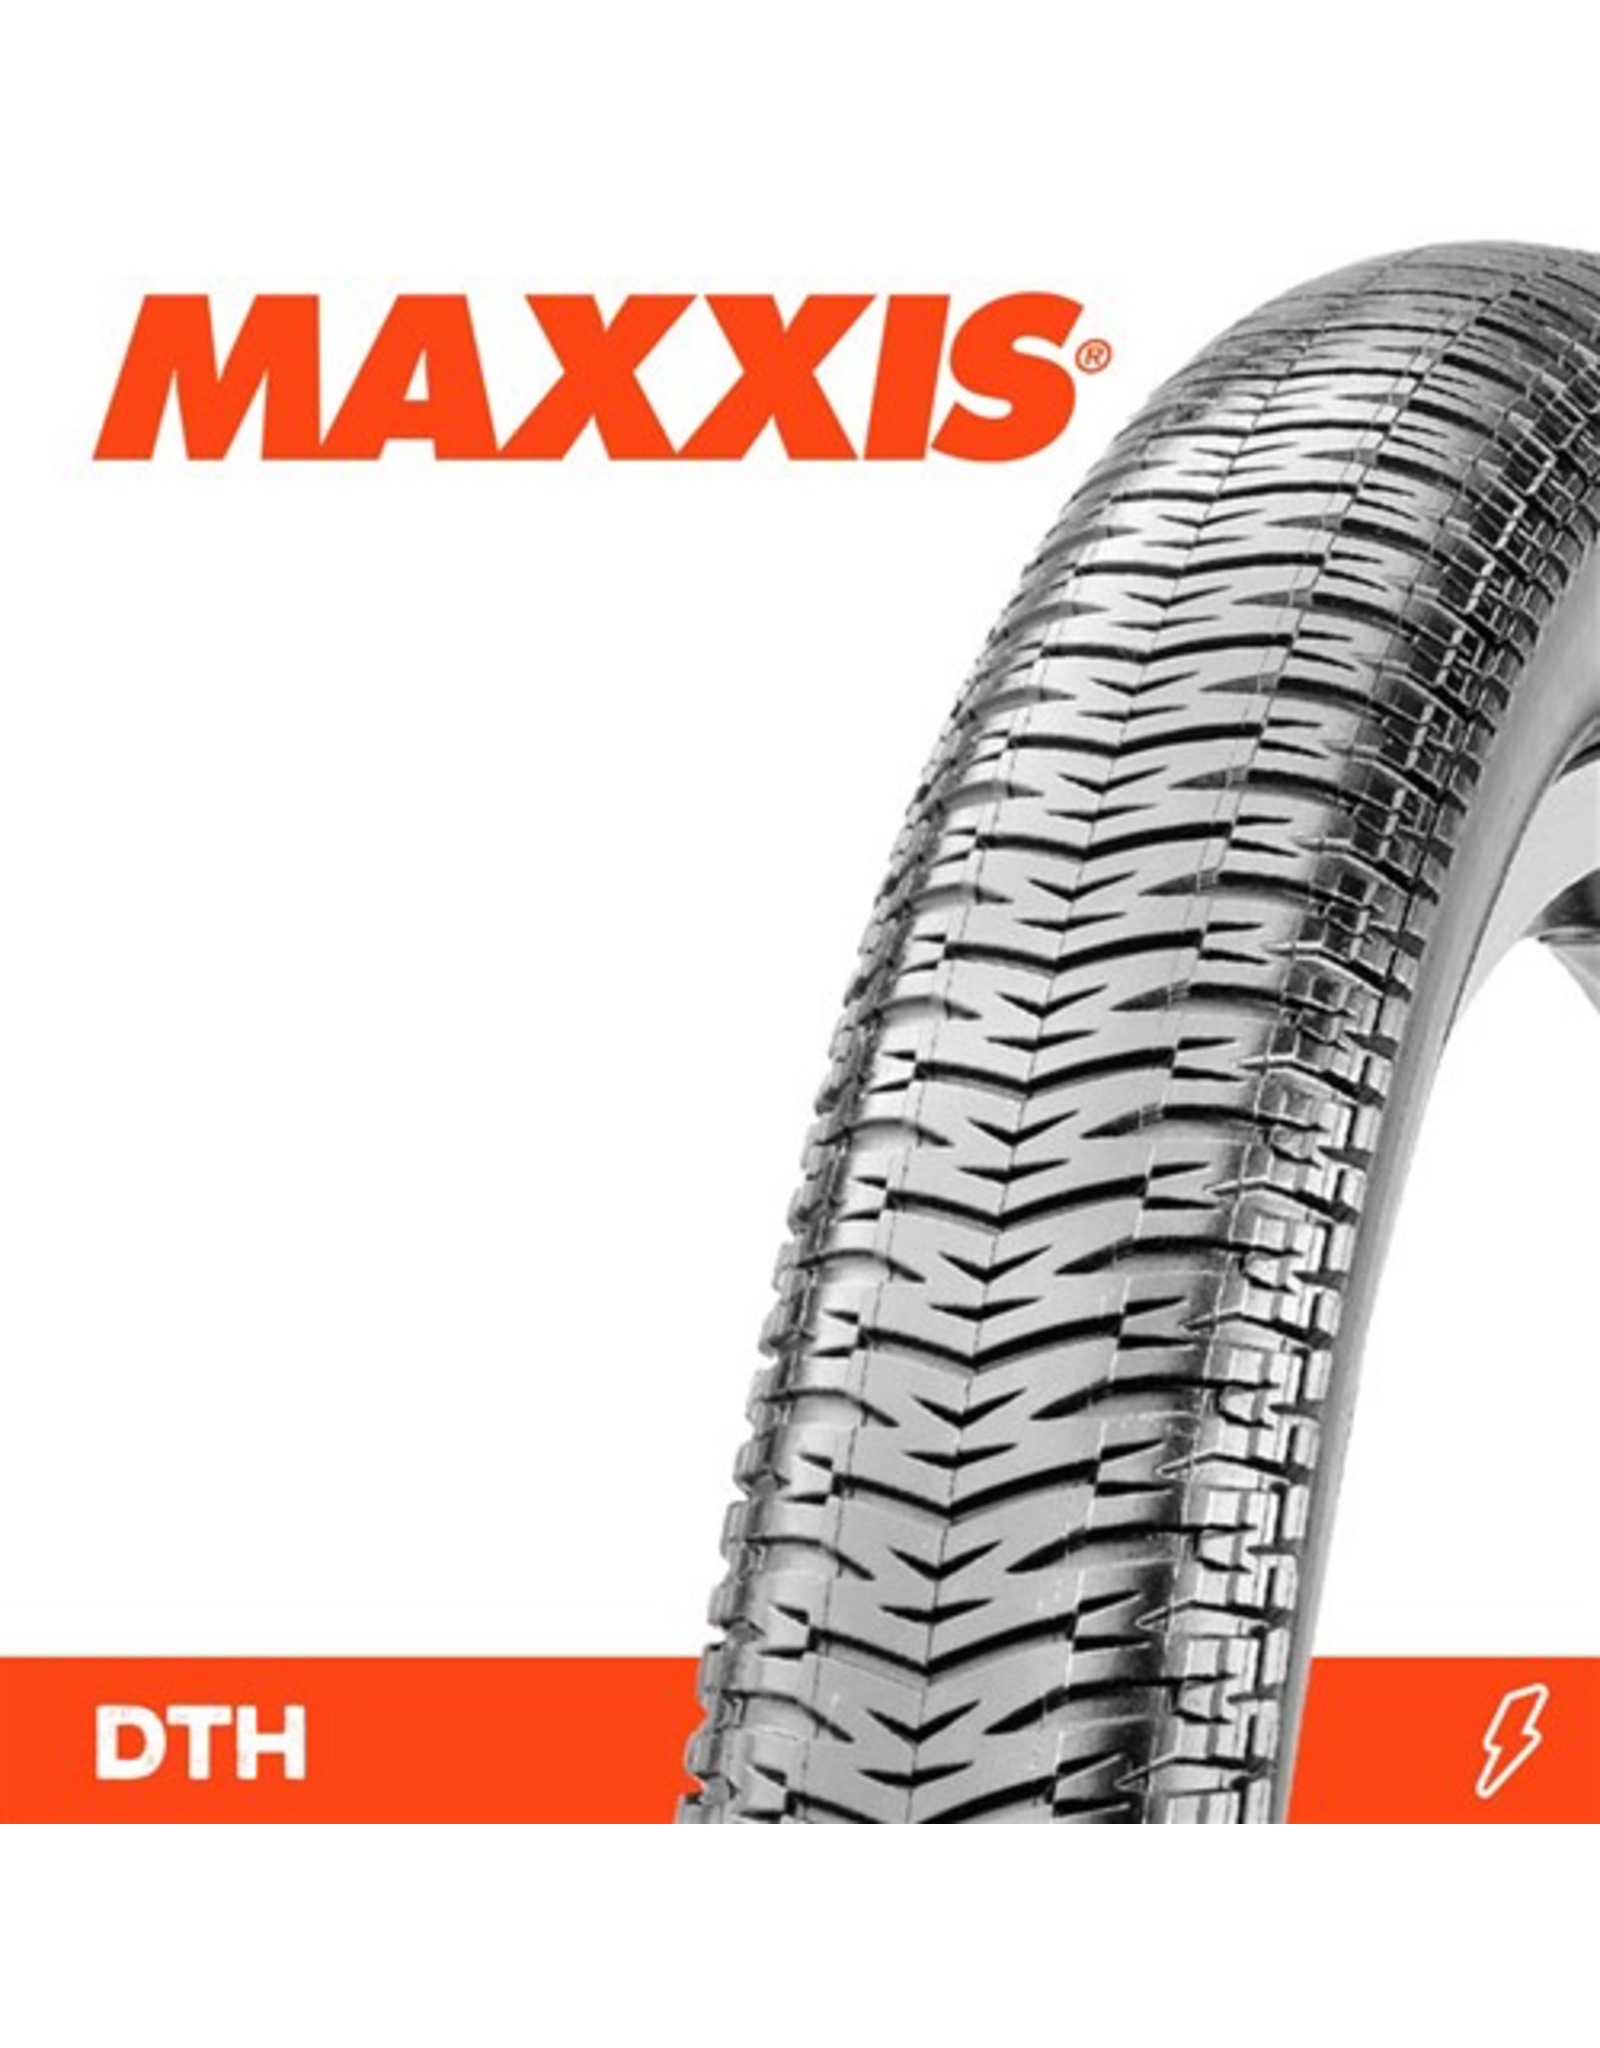 MAXXIS MAXXIS DTH 26 X 2.30” WIRE 60TPI TYRE